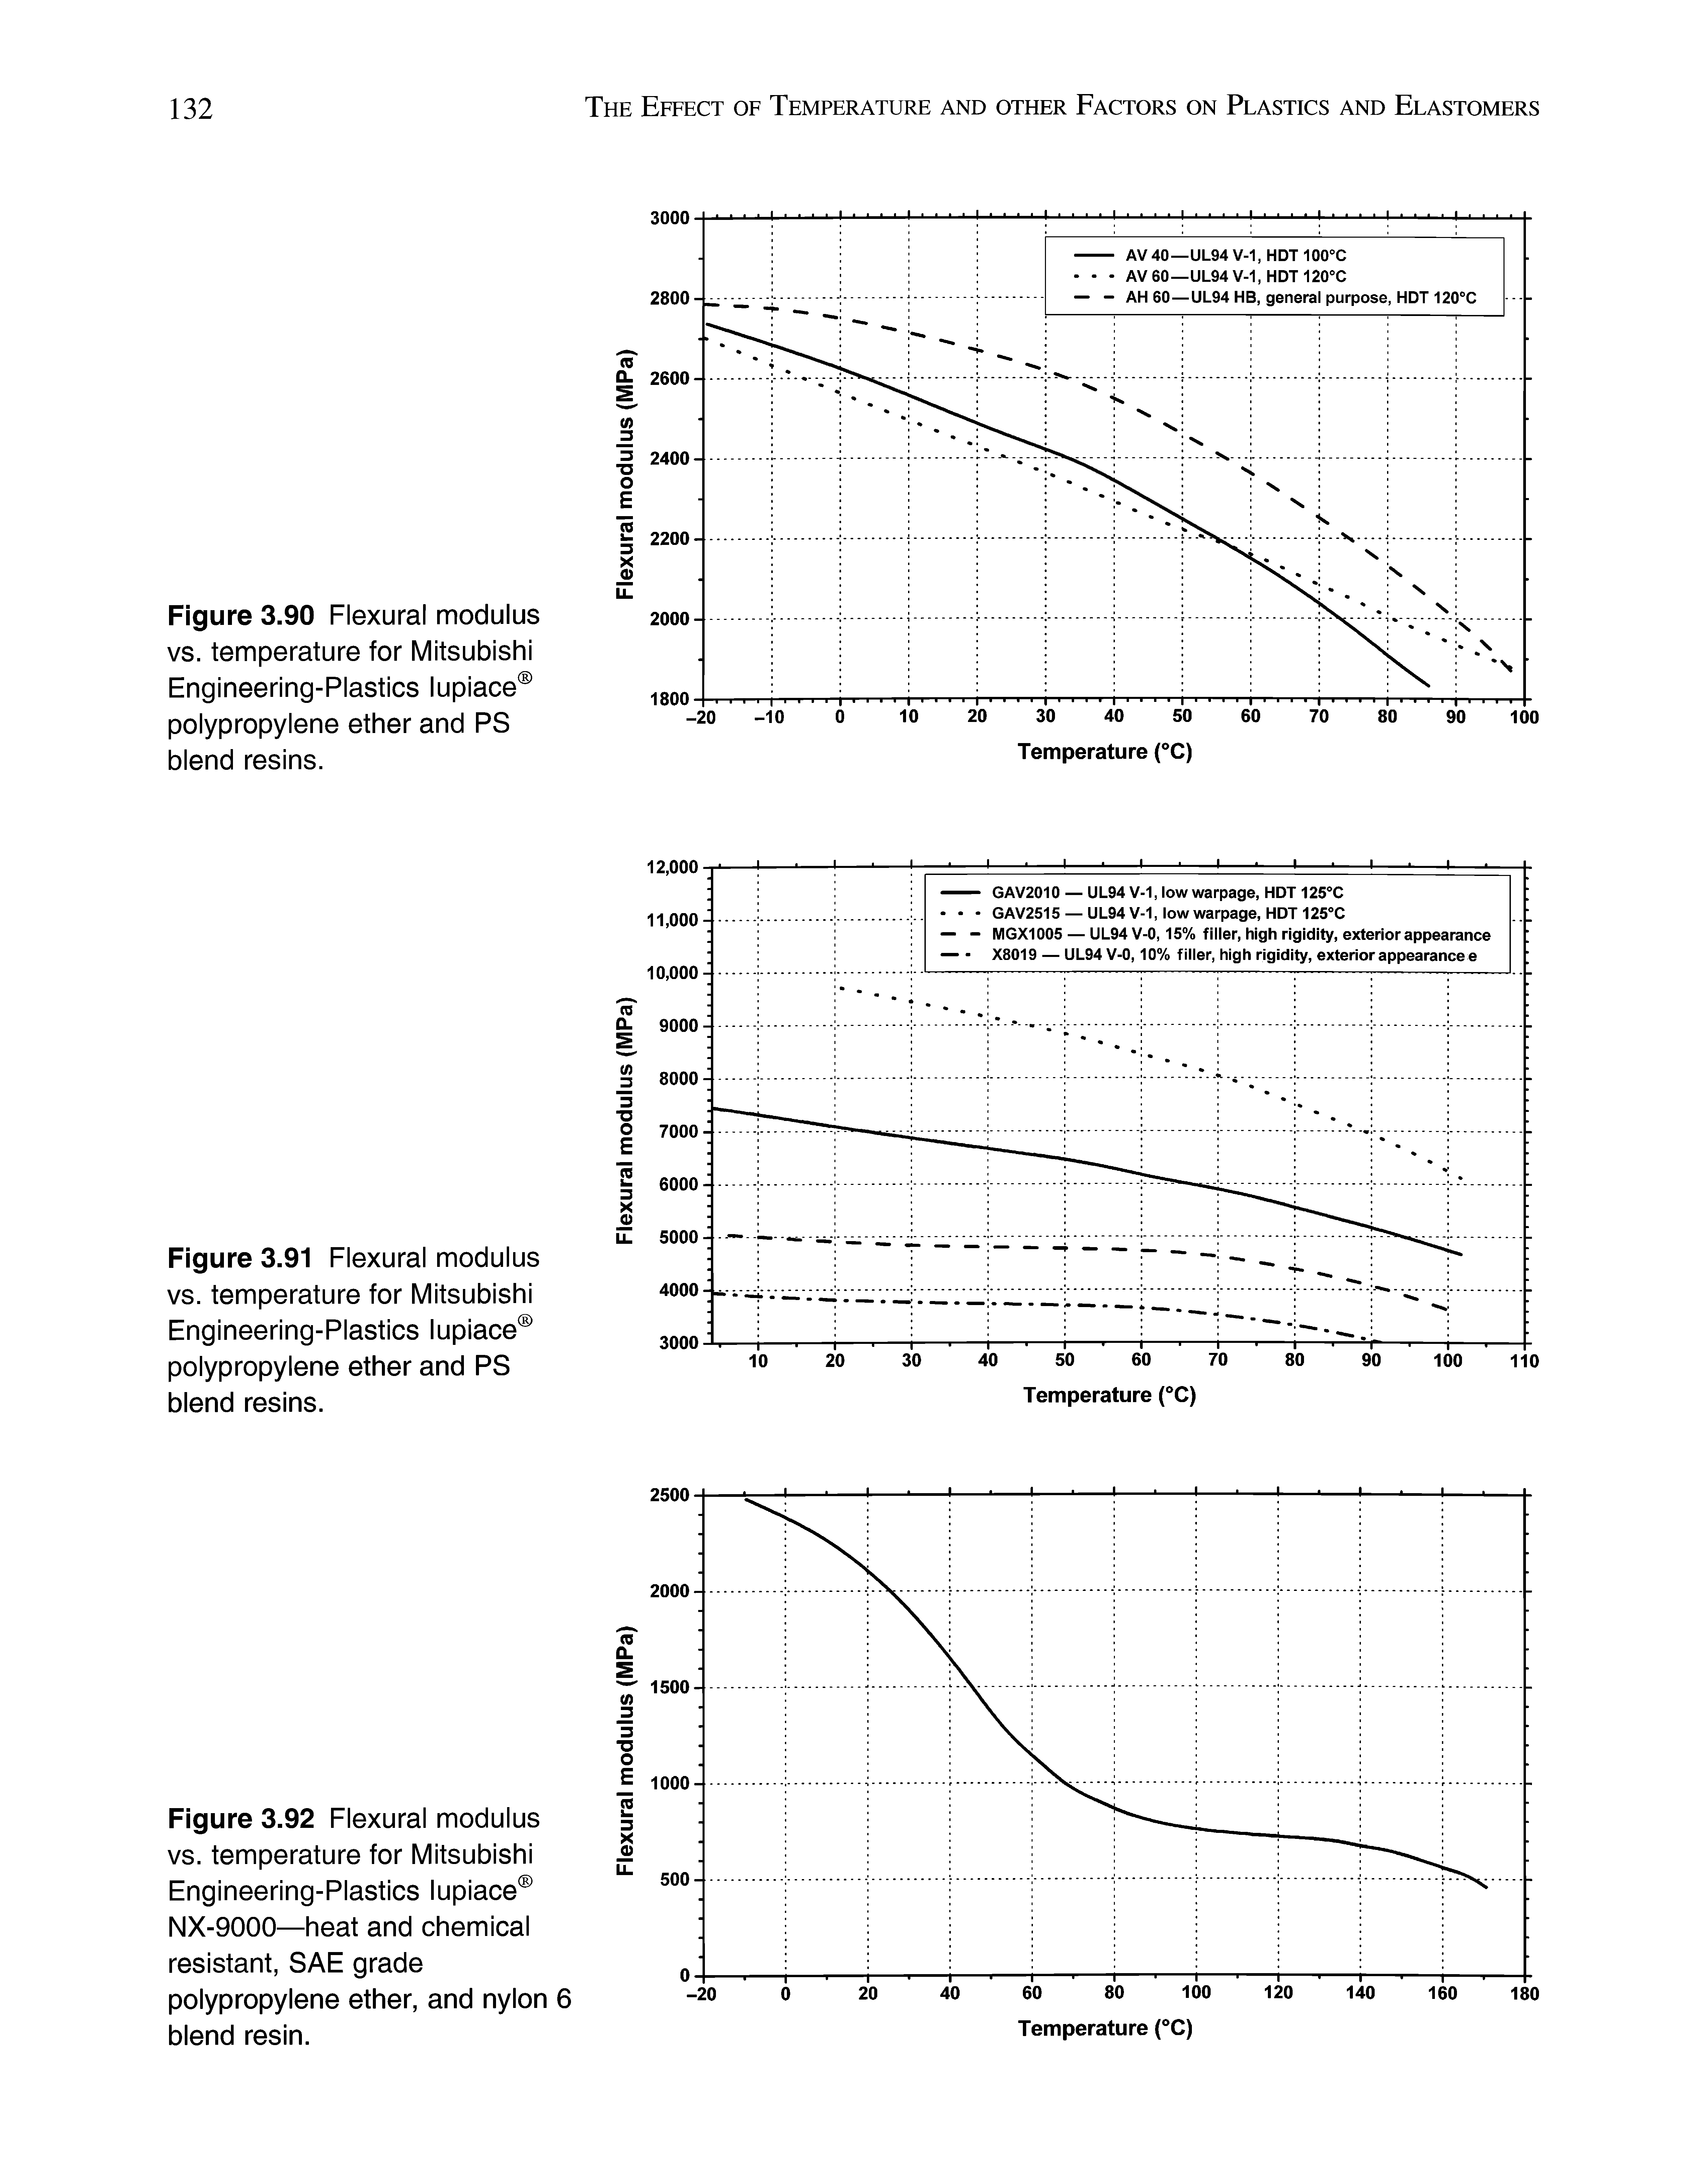 Figure 3.91 Flexural modulus vs. temperature for Mitsubishi Engineering-Plastics Iupiace polypropylene ether and PS blend resins.